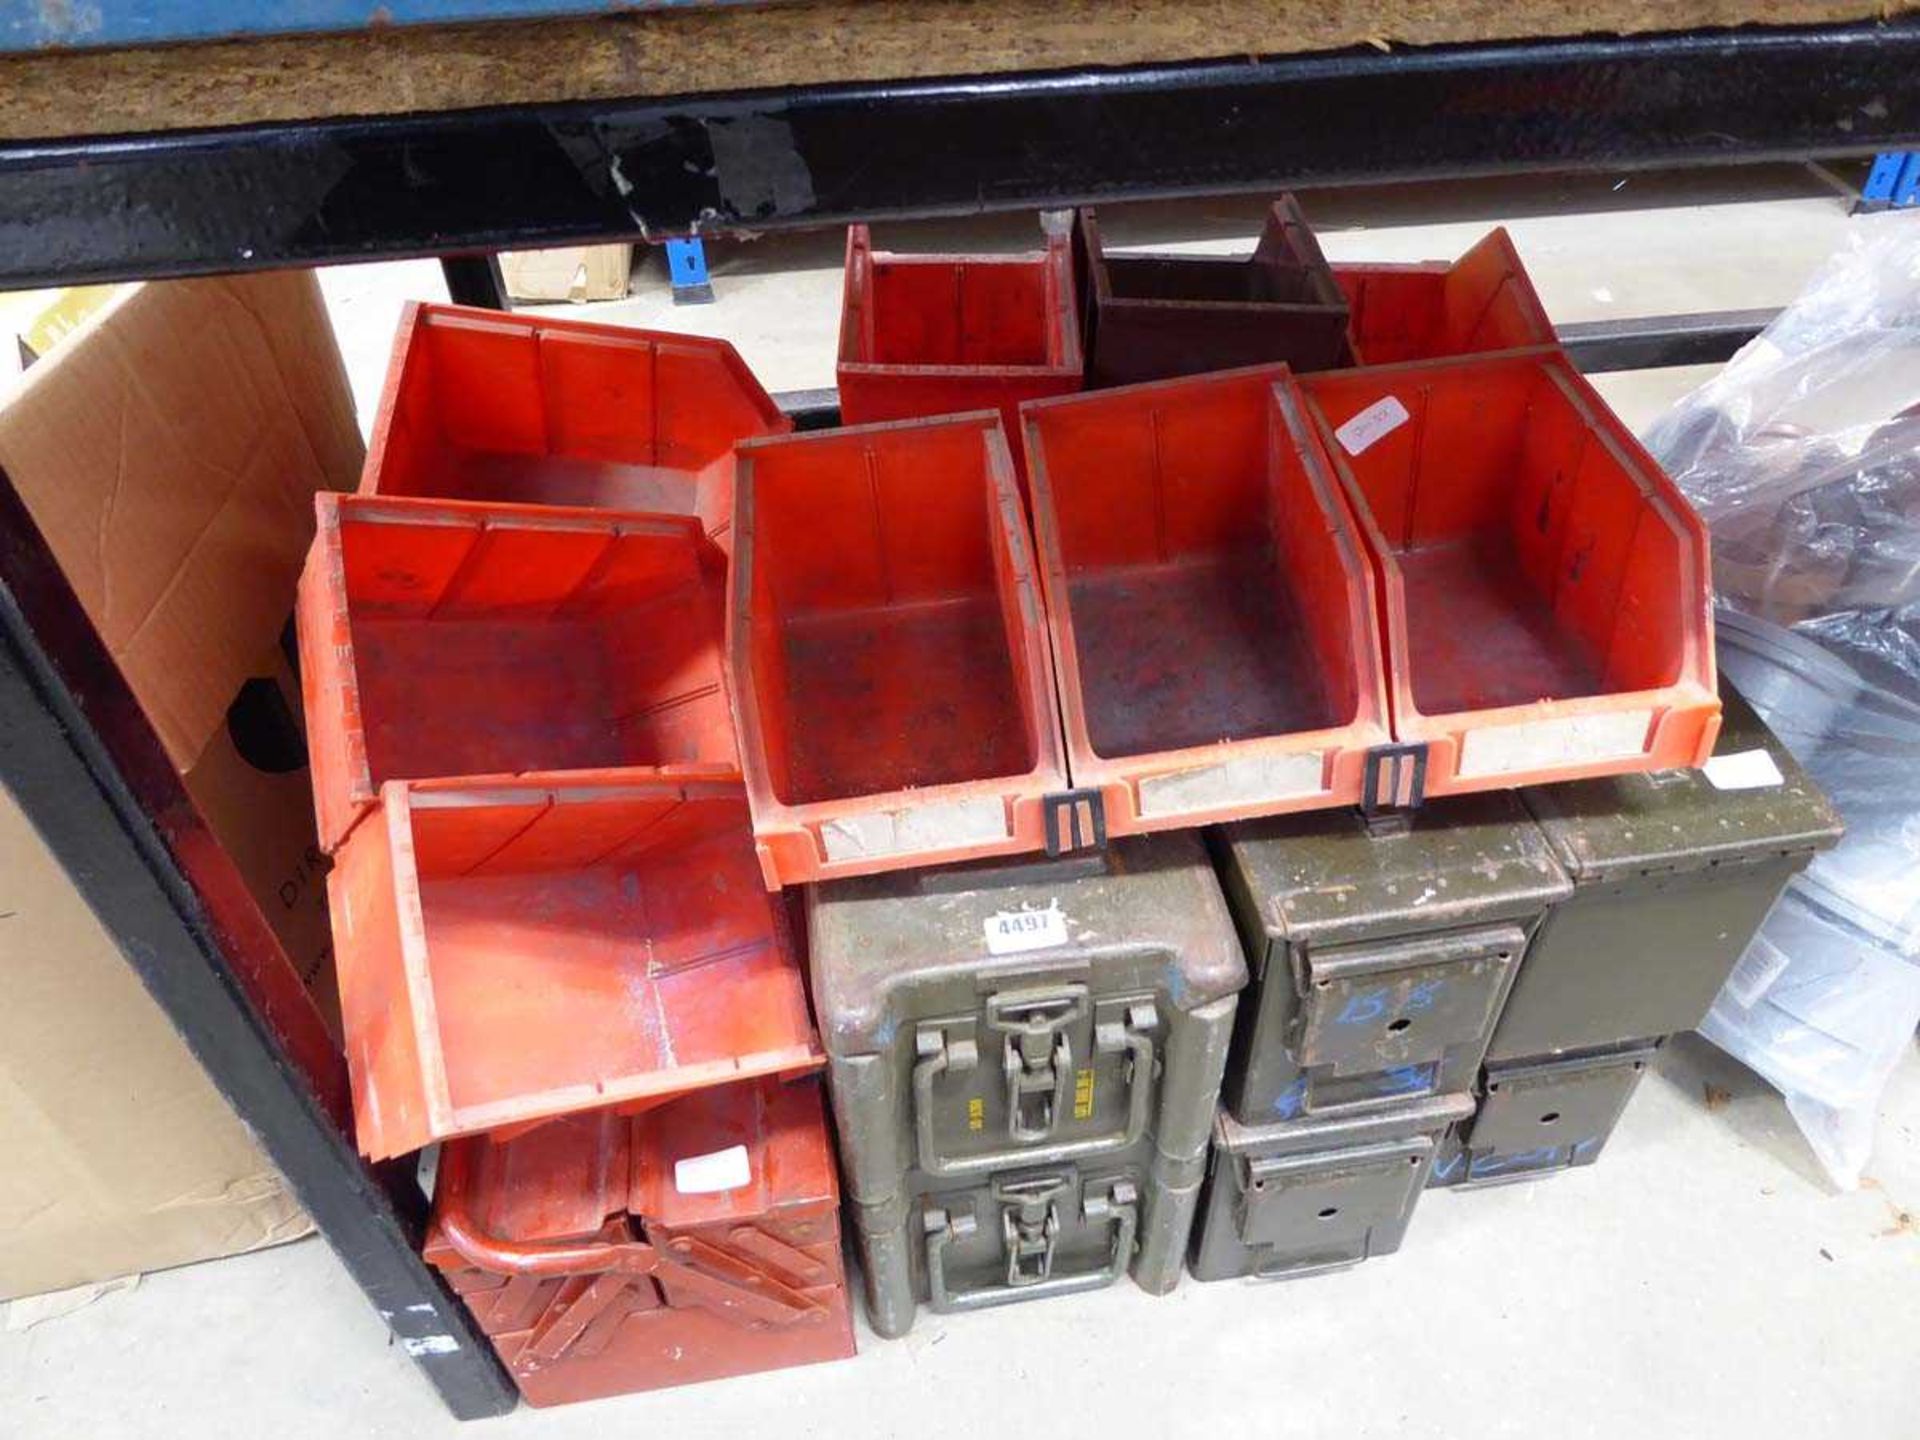 Qty of ammo boxes and linbins